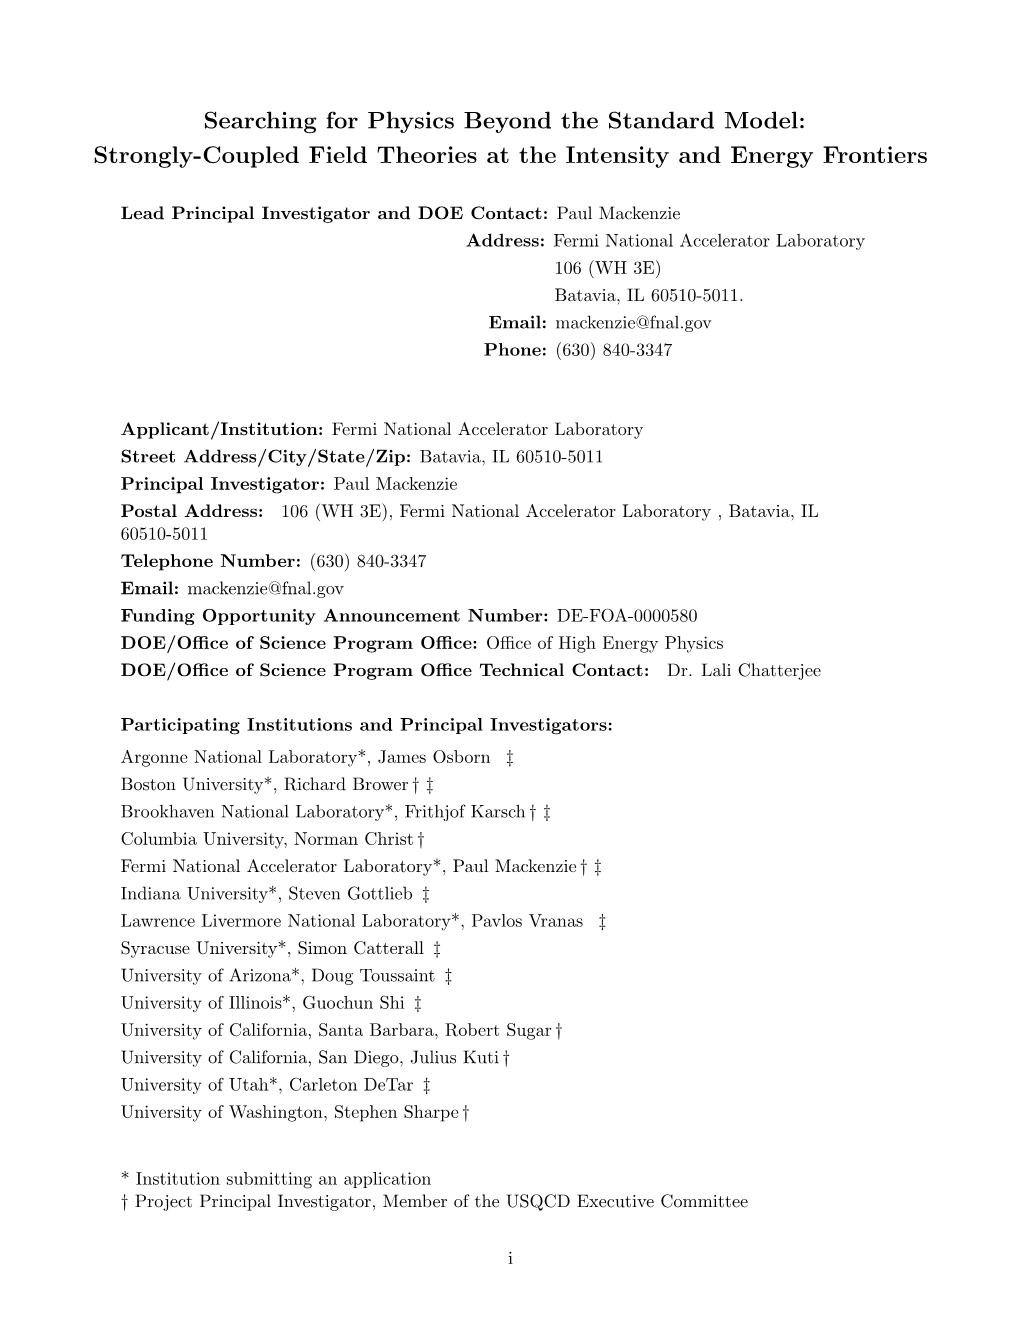 Strongly-Coupled Field Theories at the Intensity and Energy Frontiers